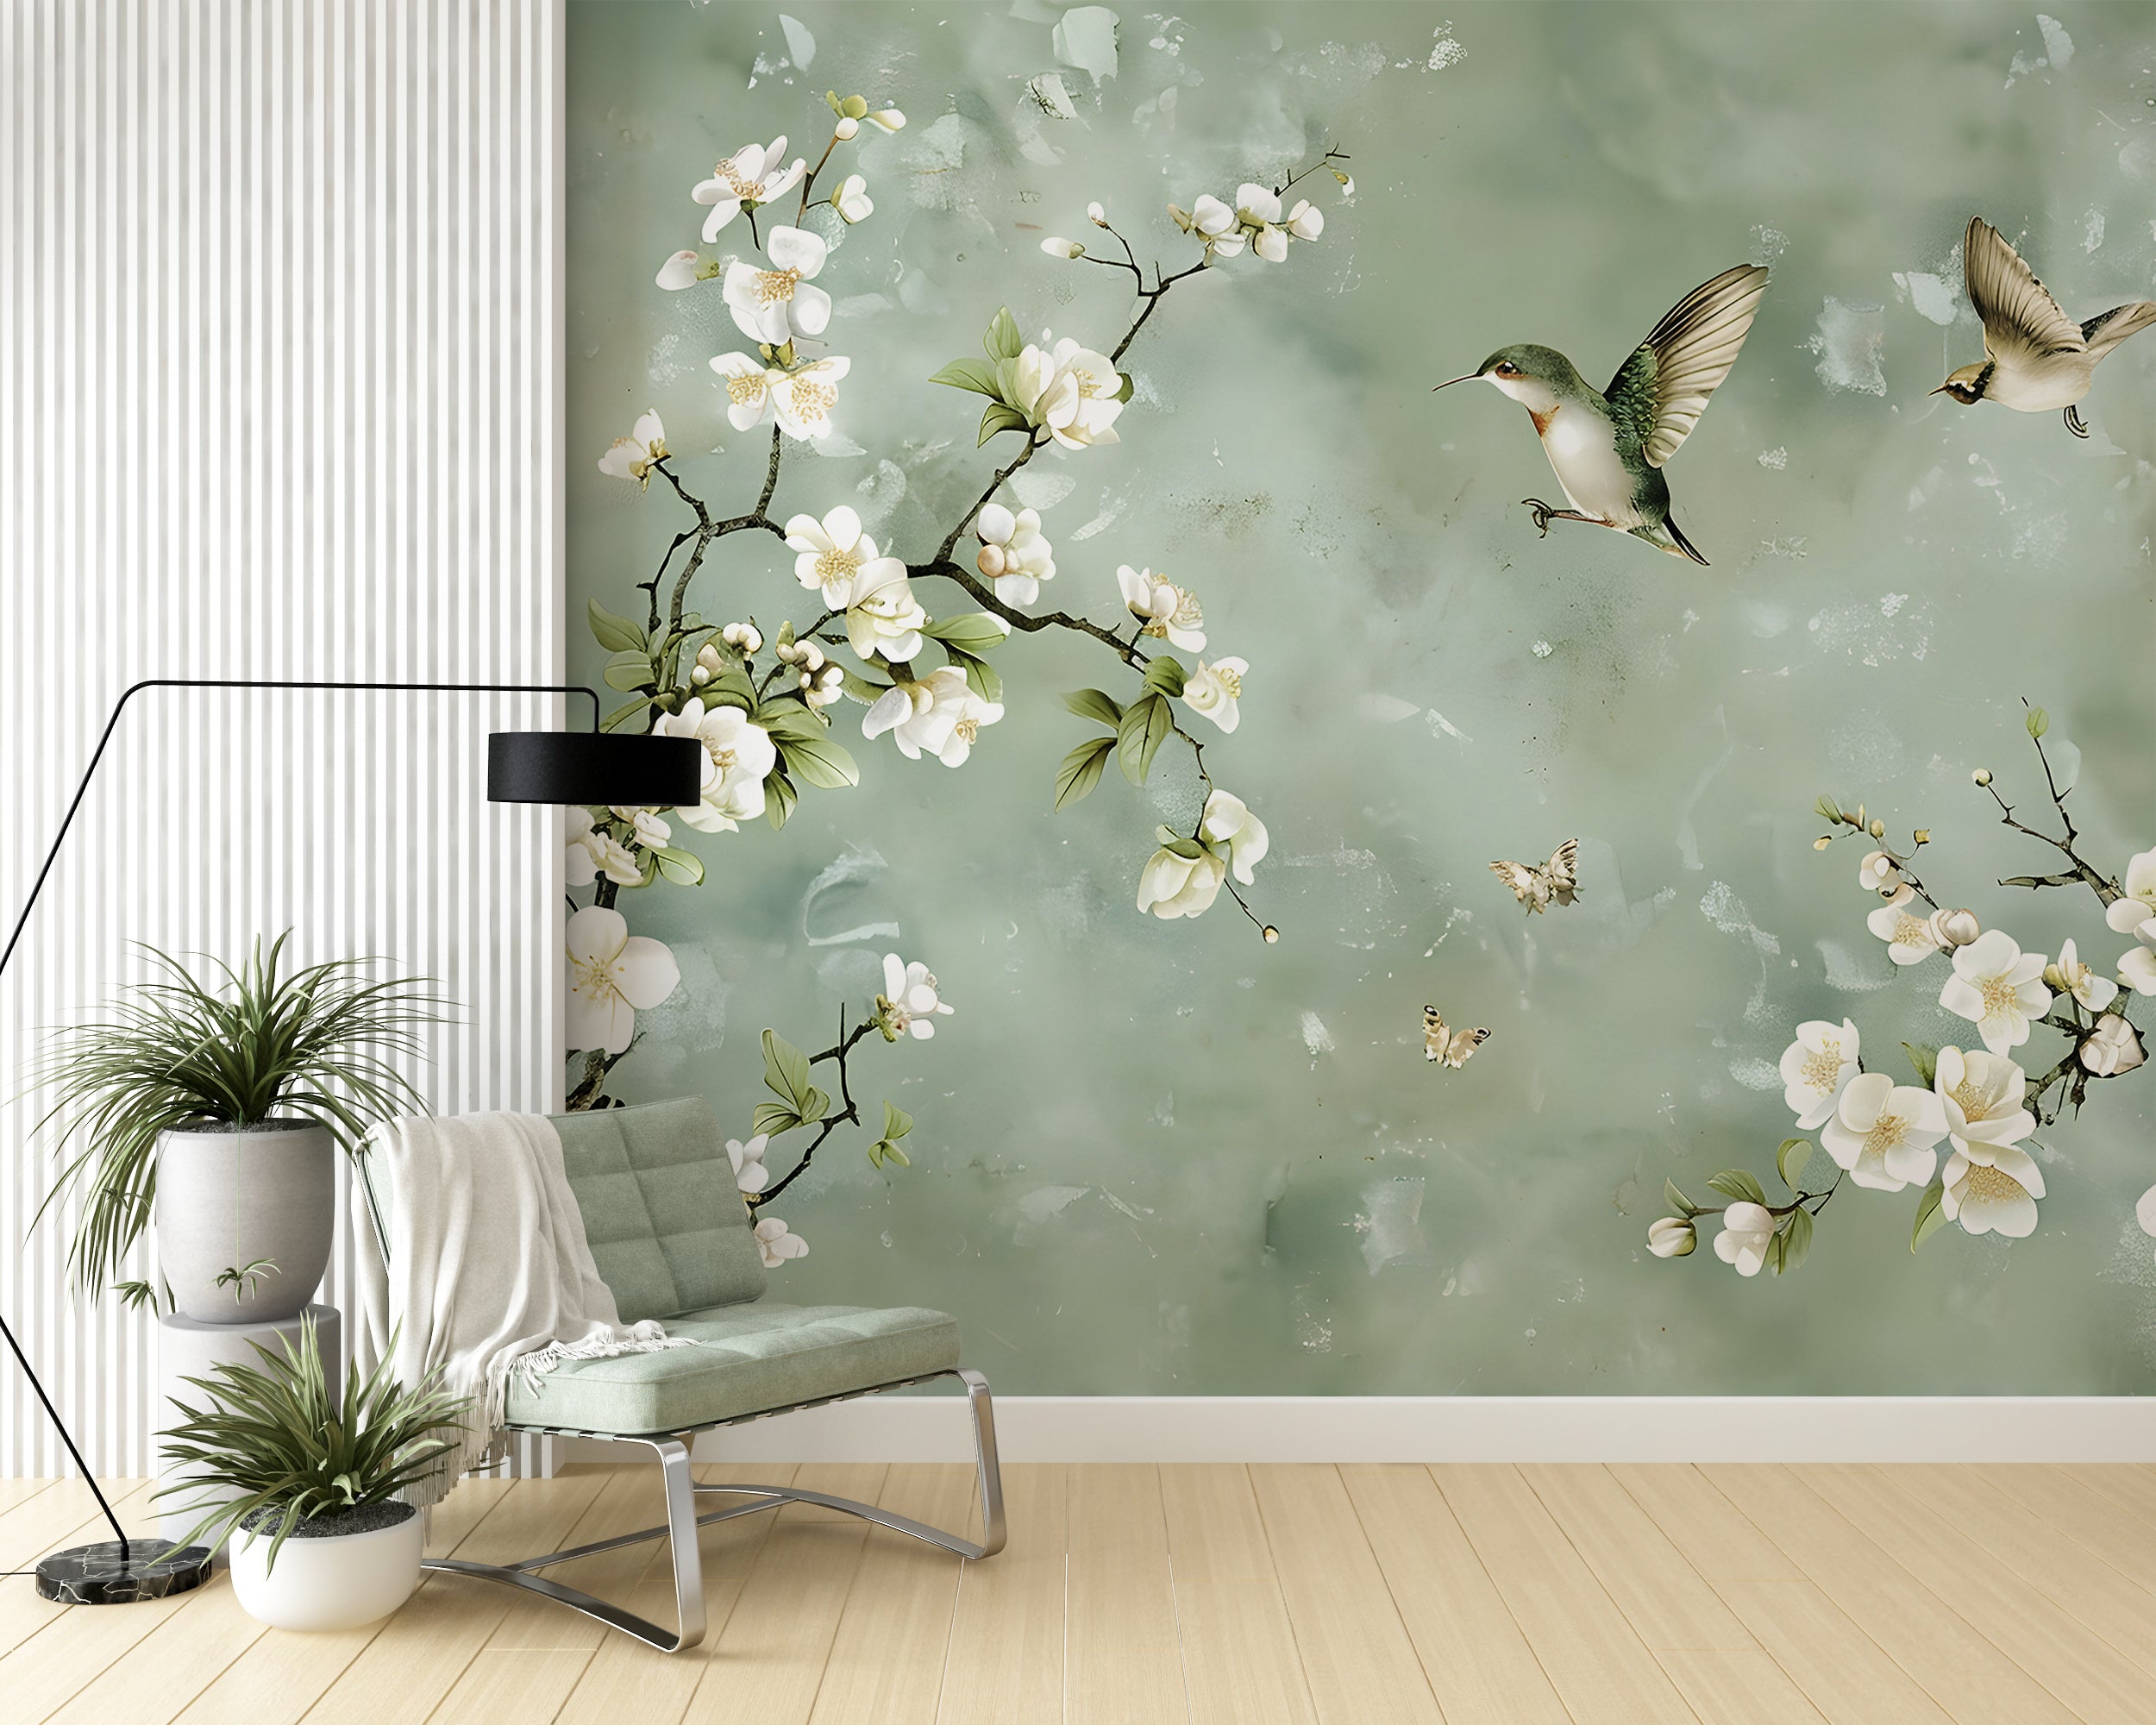 Removable Green Chinoiserie Wall Decor Delicate Floral Wall Covering in Soft Green